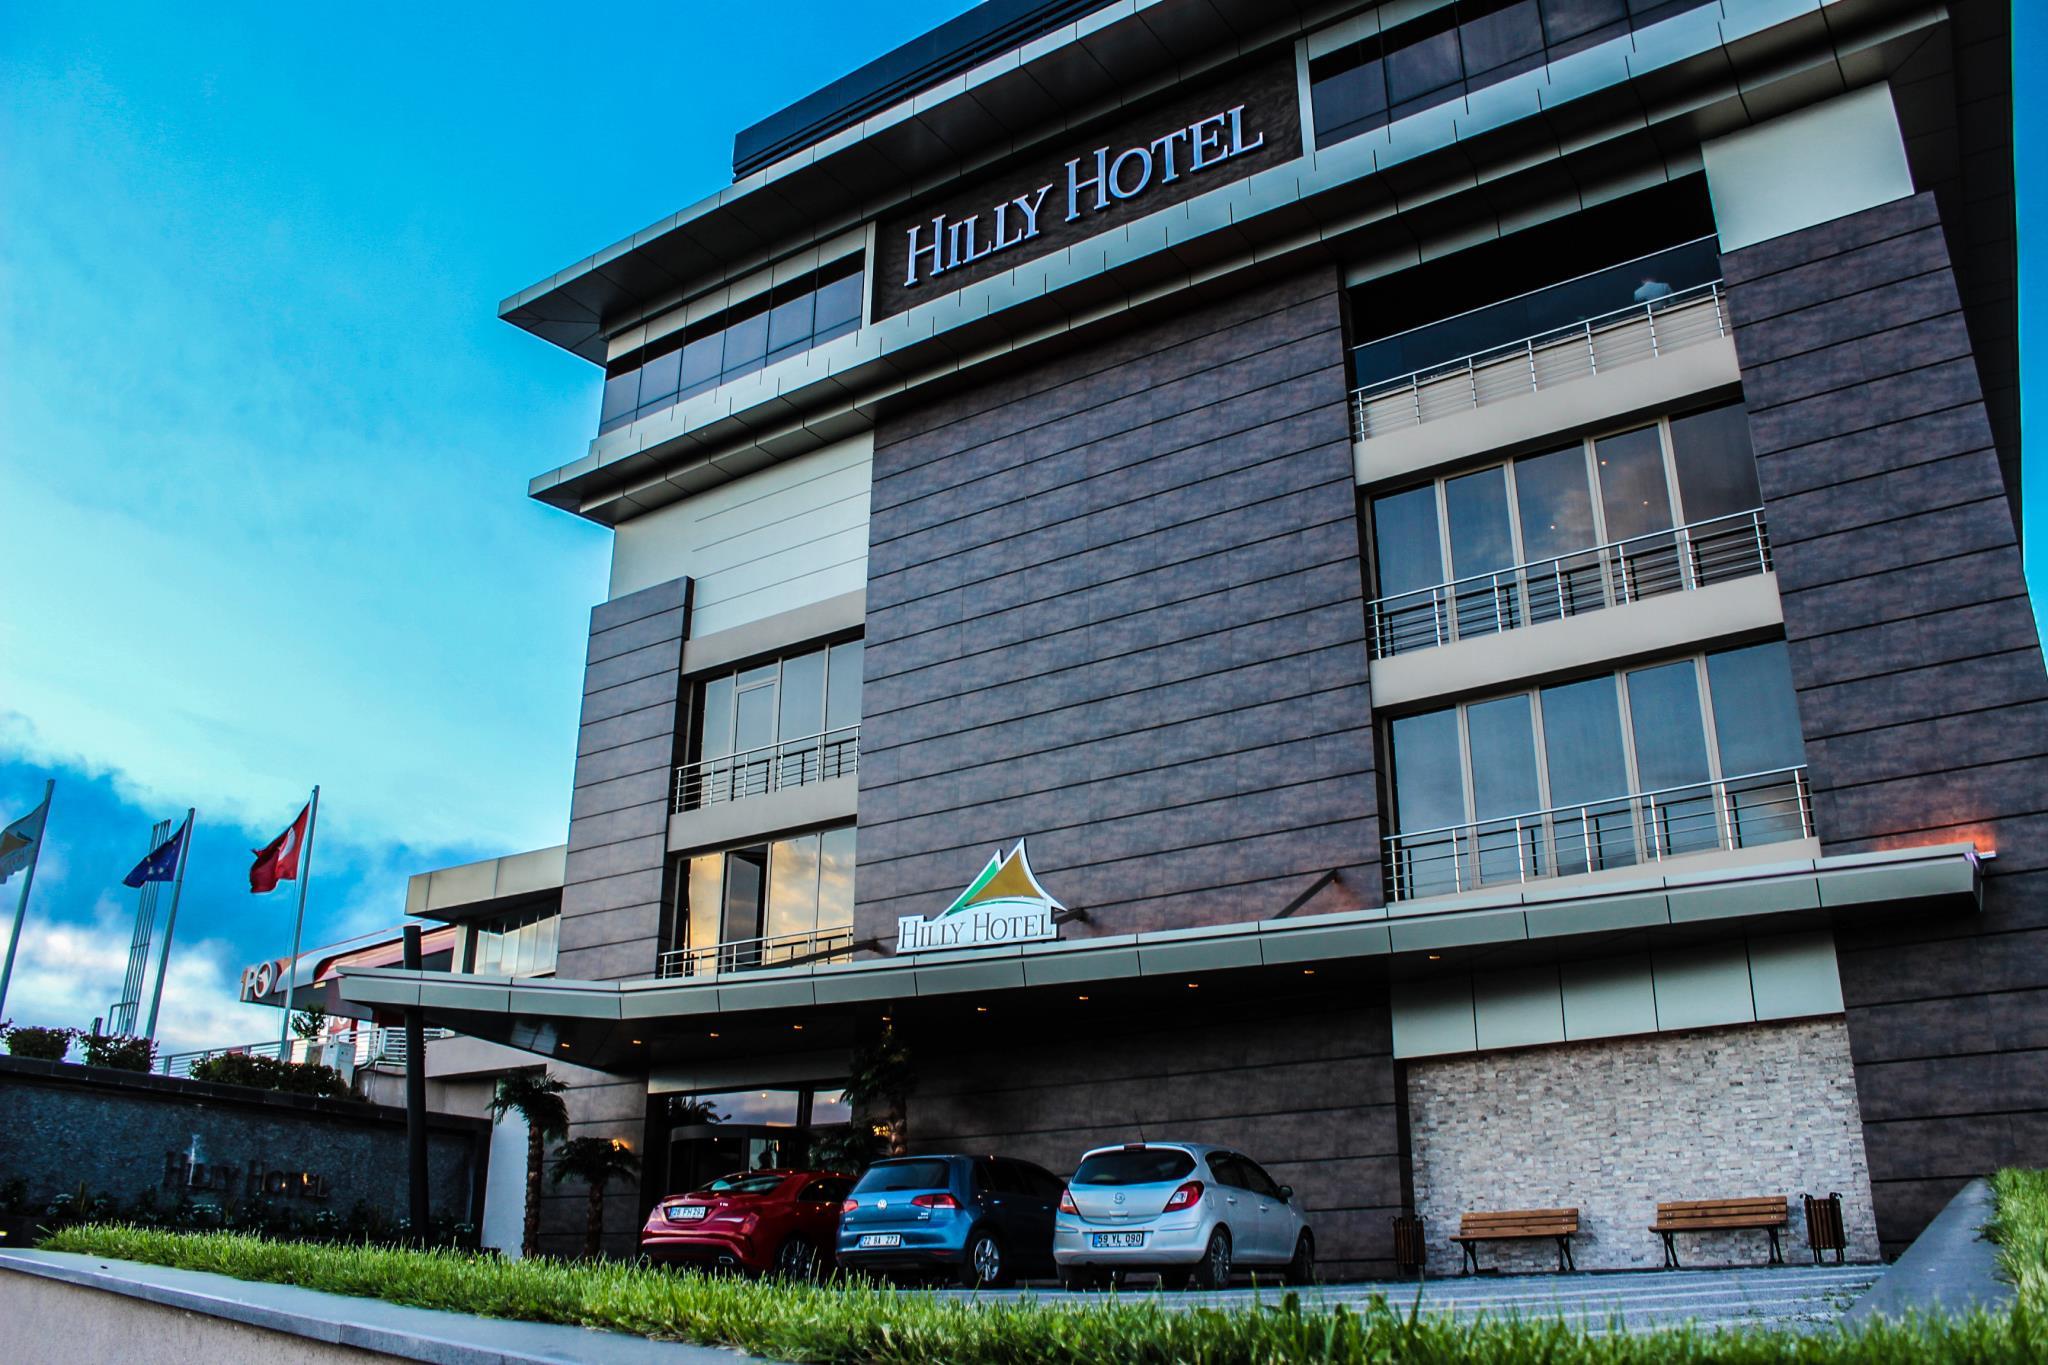 Hilly Hotel image 1